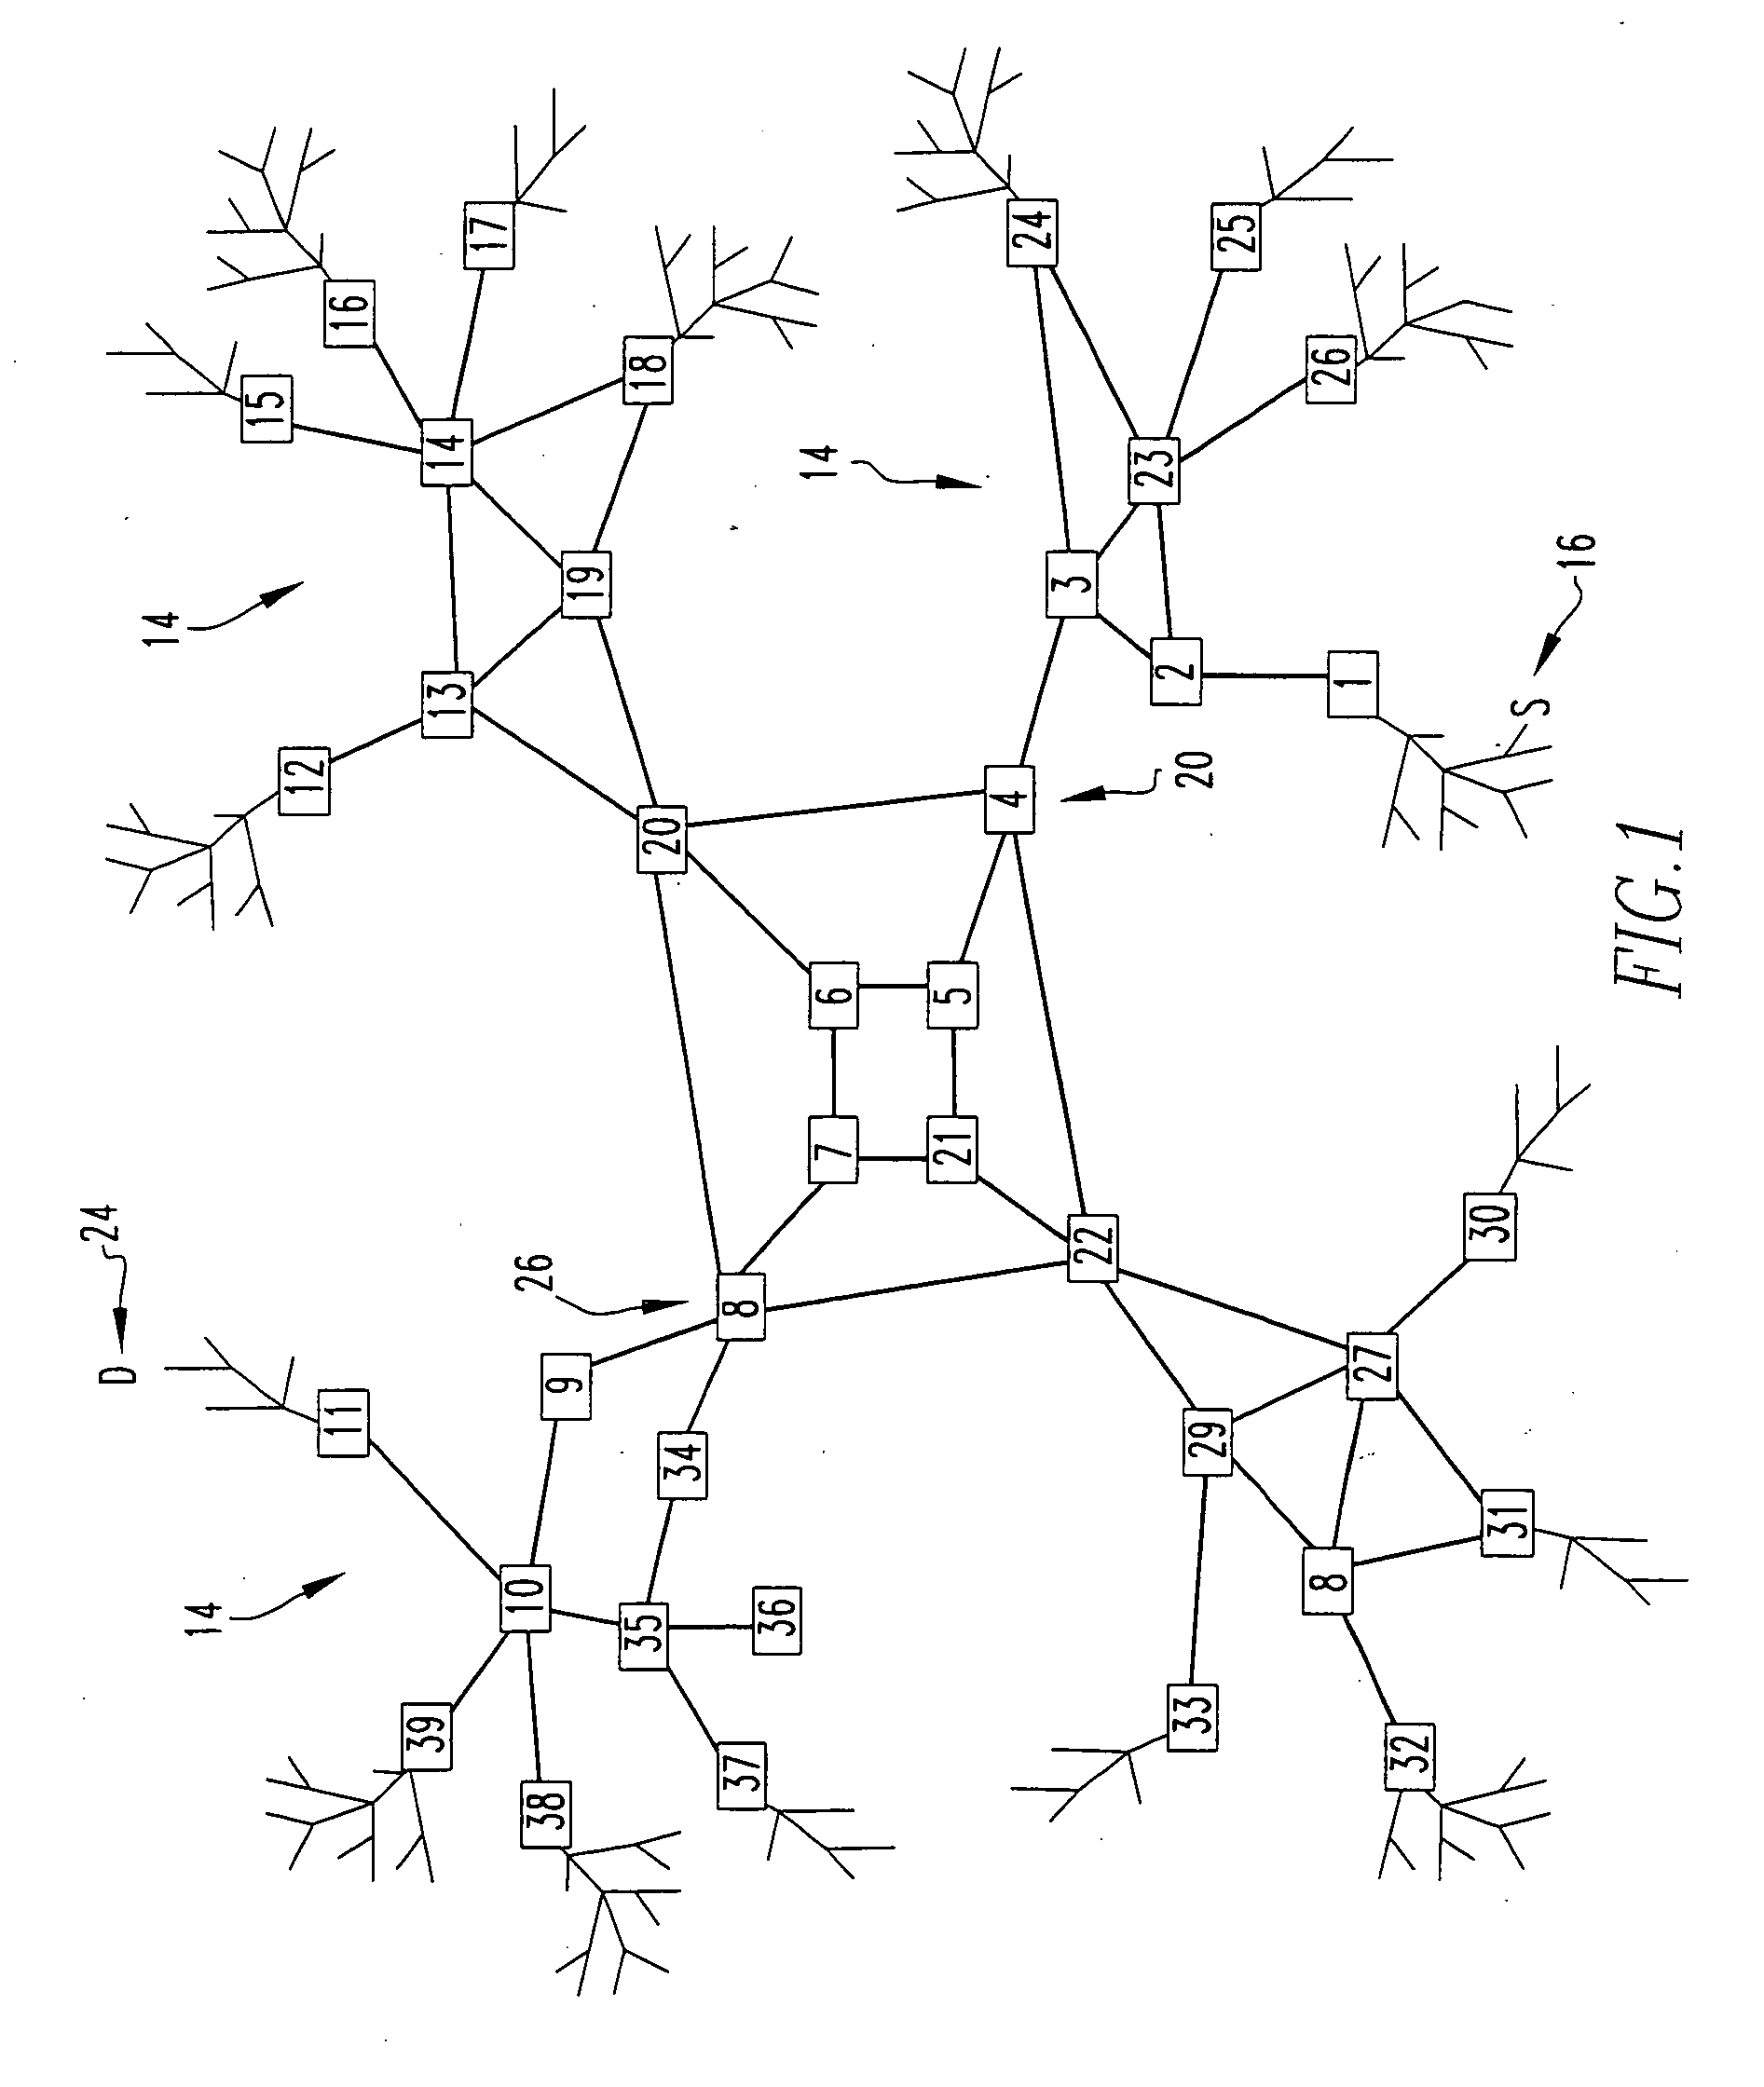 Method and system for telecommunications including self-organizing scalable ethernet using is-is hierarchy